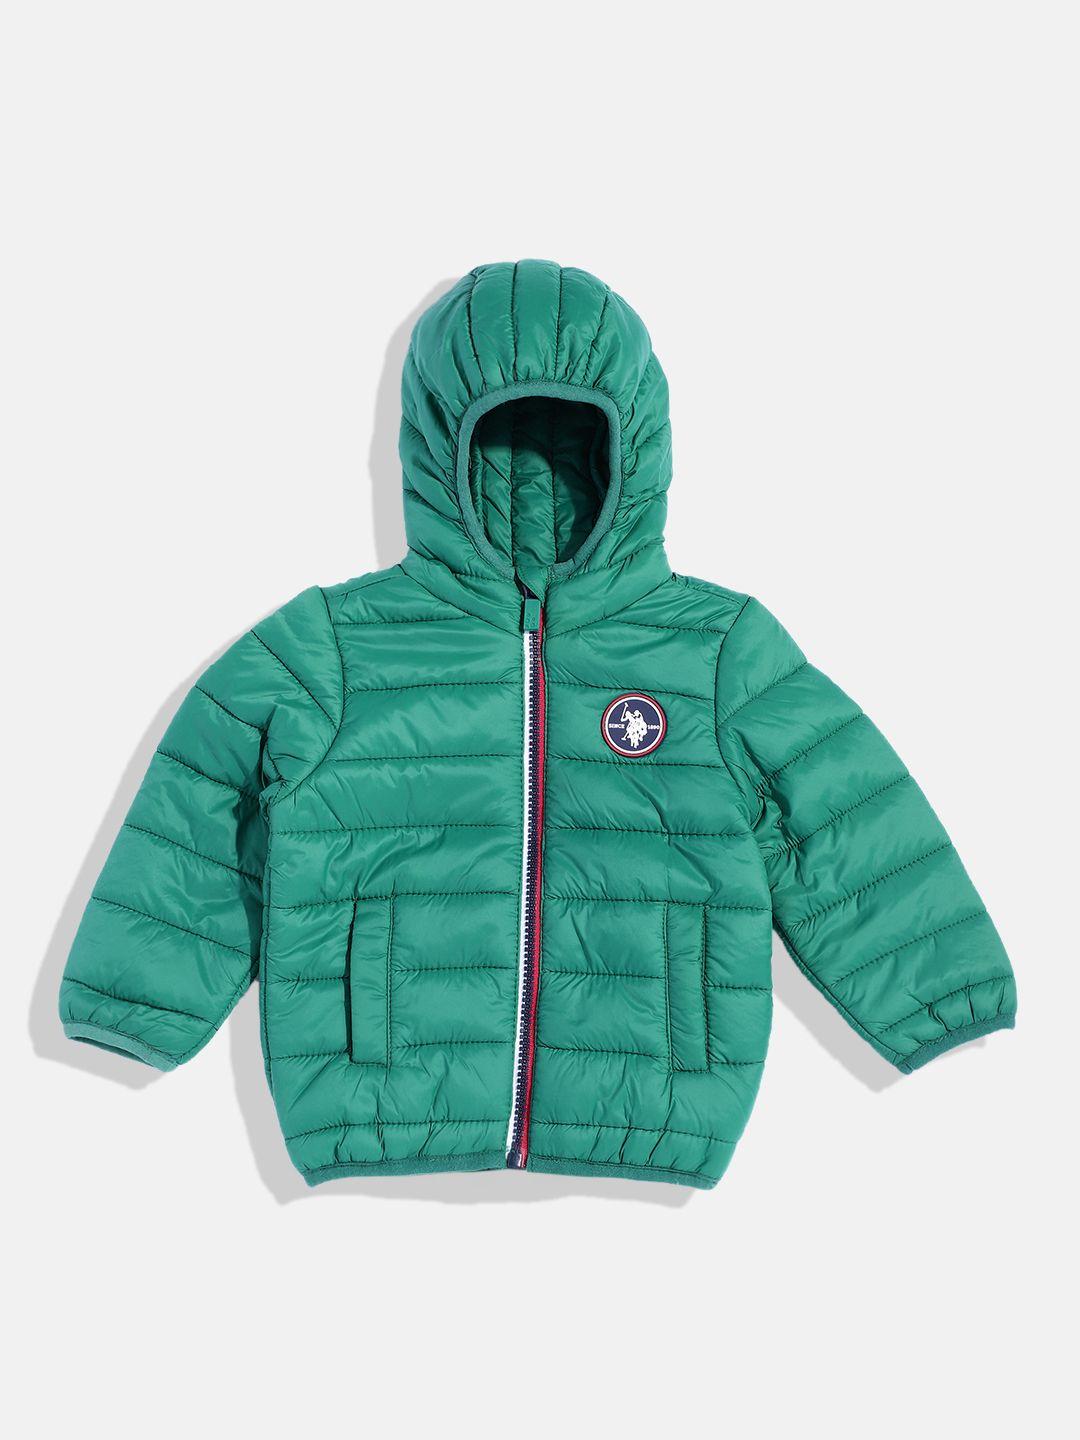 U.S. Polo Assn. Kids Boys Solid Hooded Puffer Jacket With Brand Logo Applique Detail